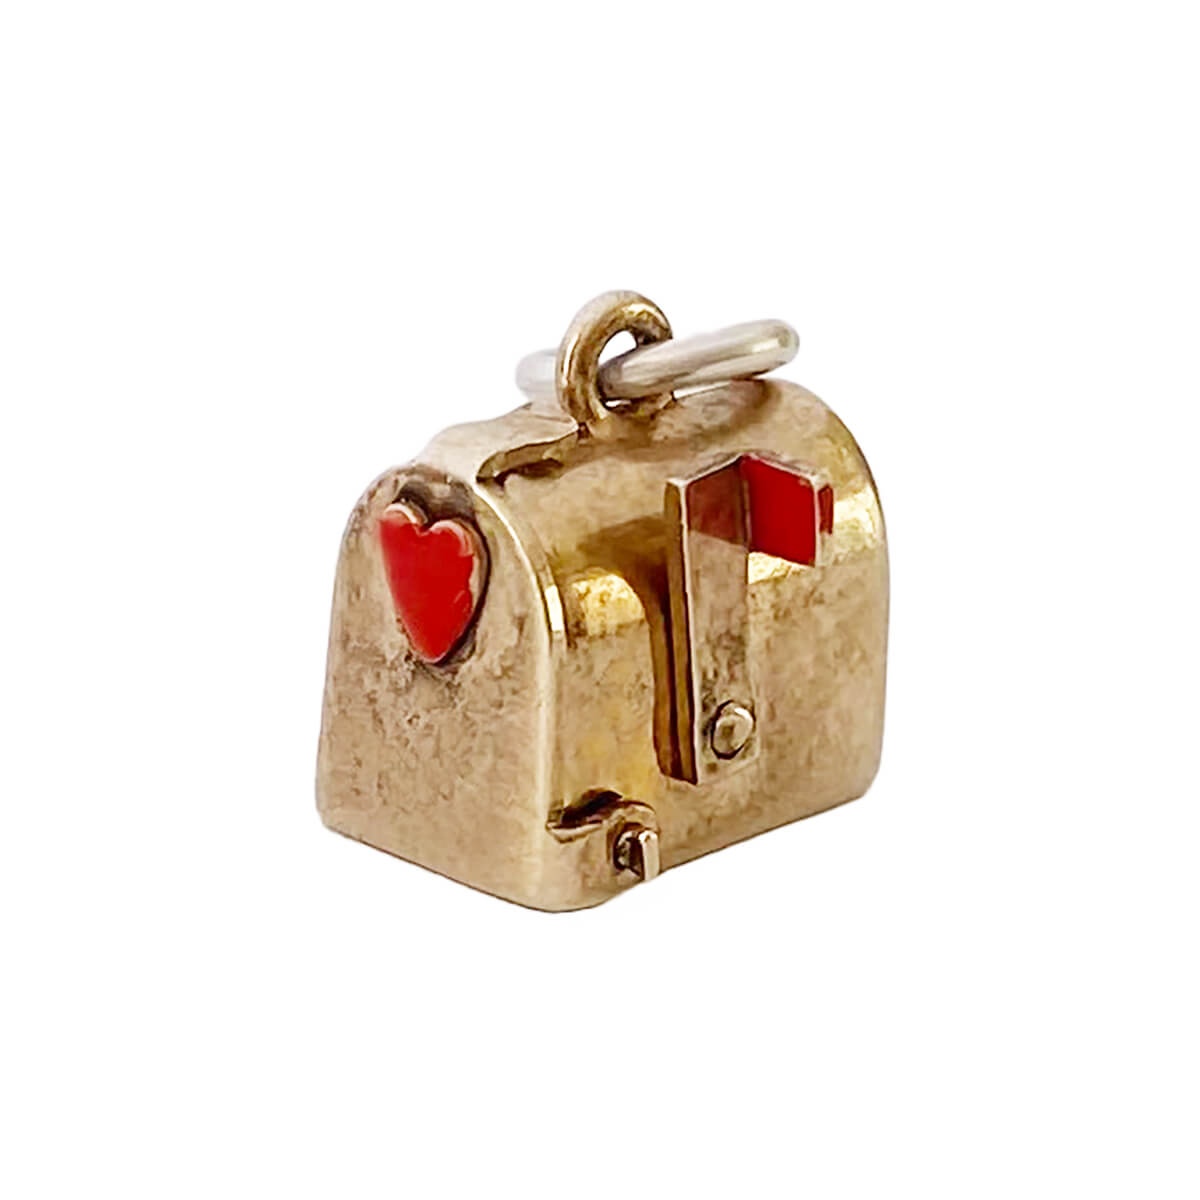 Vintage 1940s charm letterbox with red enamel heart